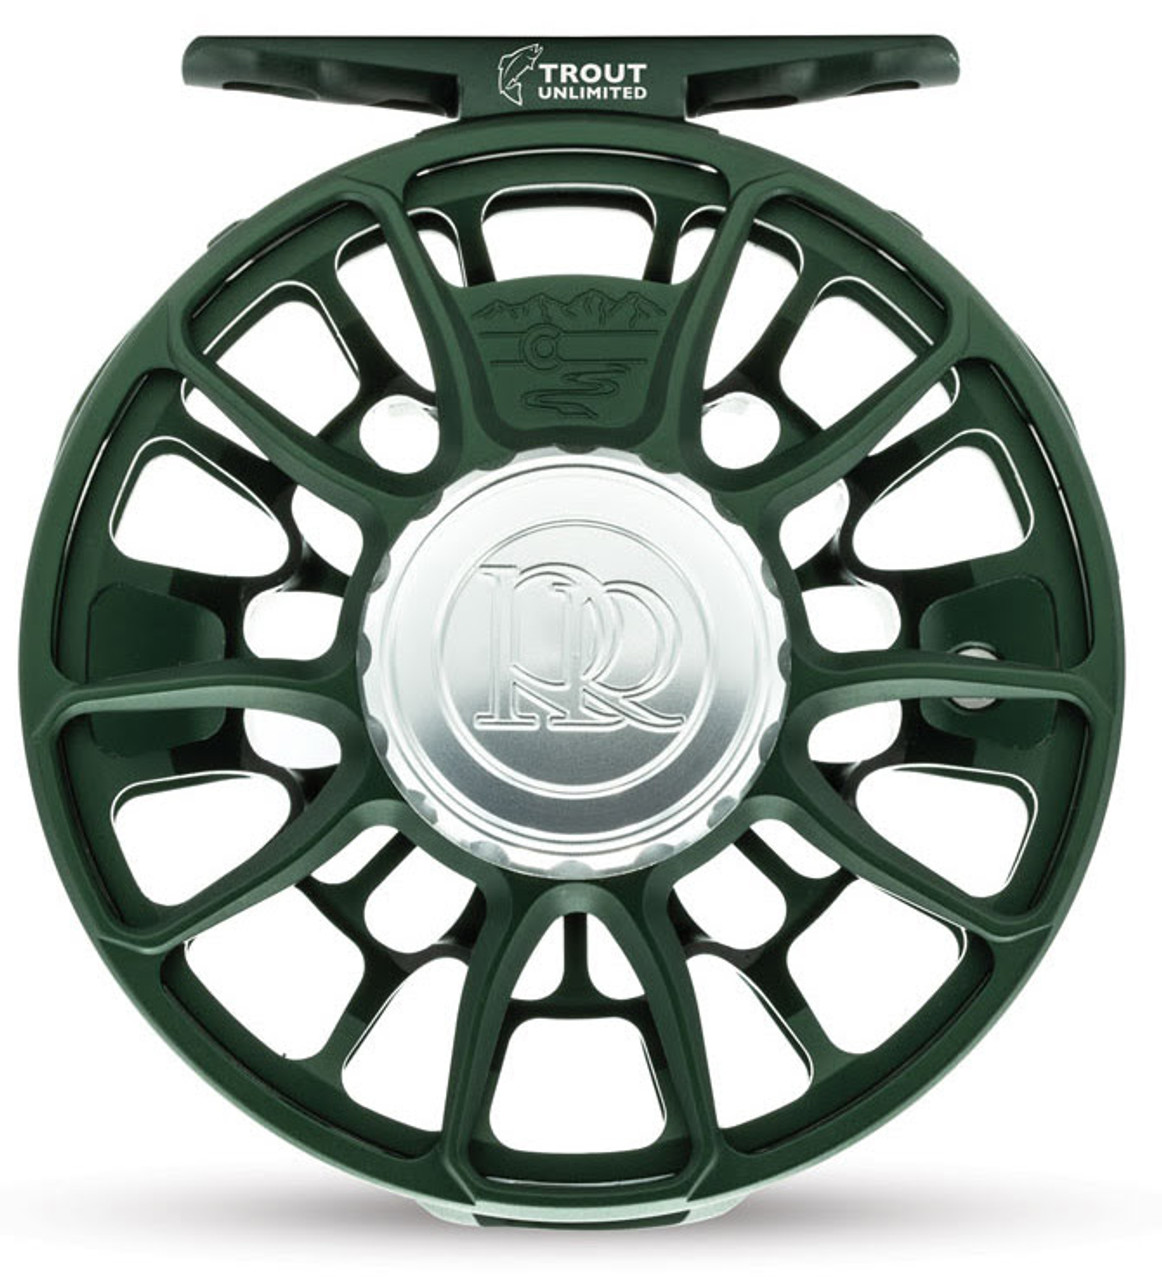 Ross Animas Fly Reel - 5-6WT - Trout Unlimited Edition - Made in